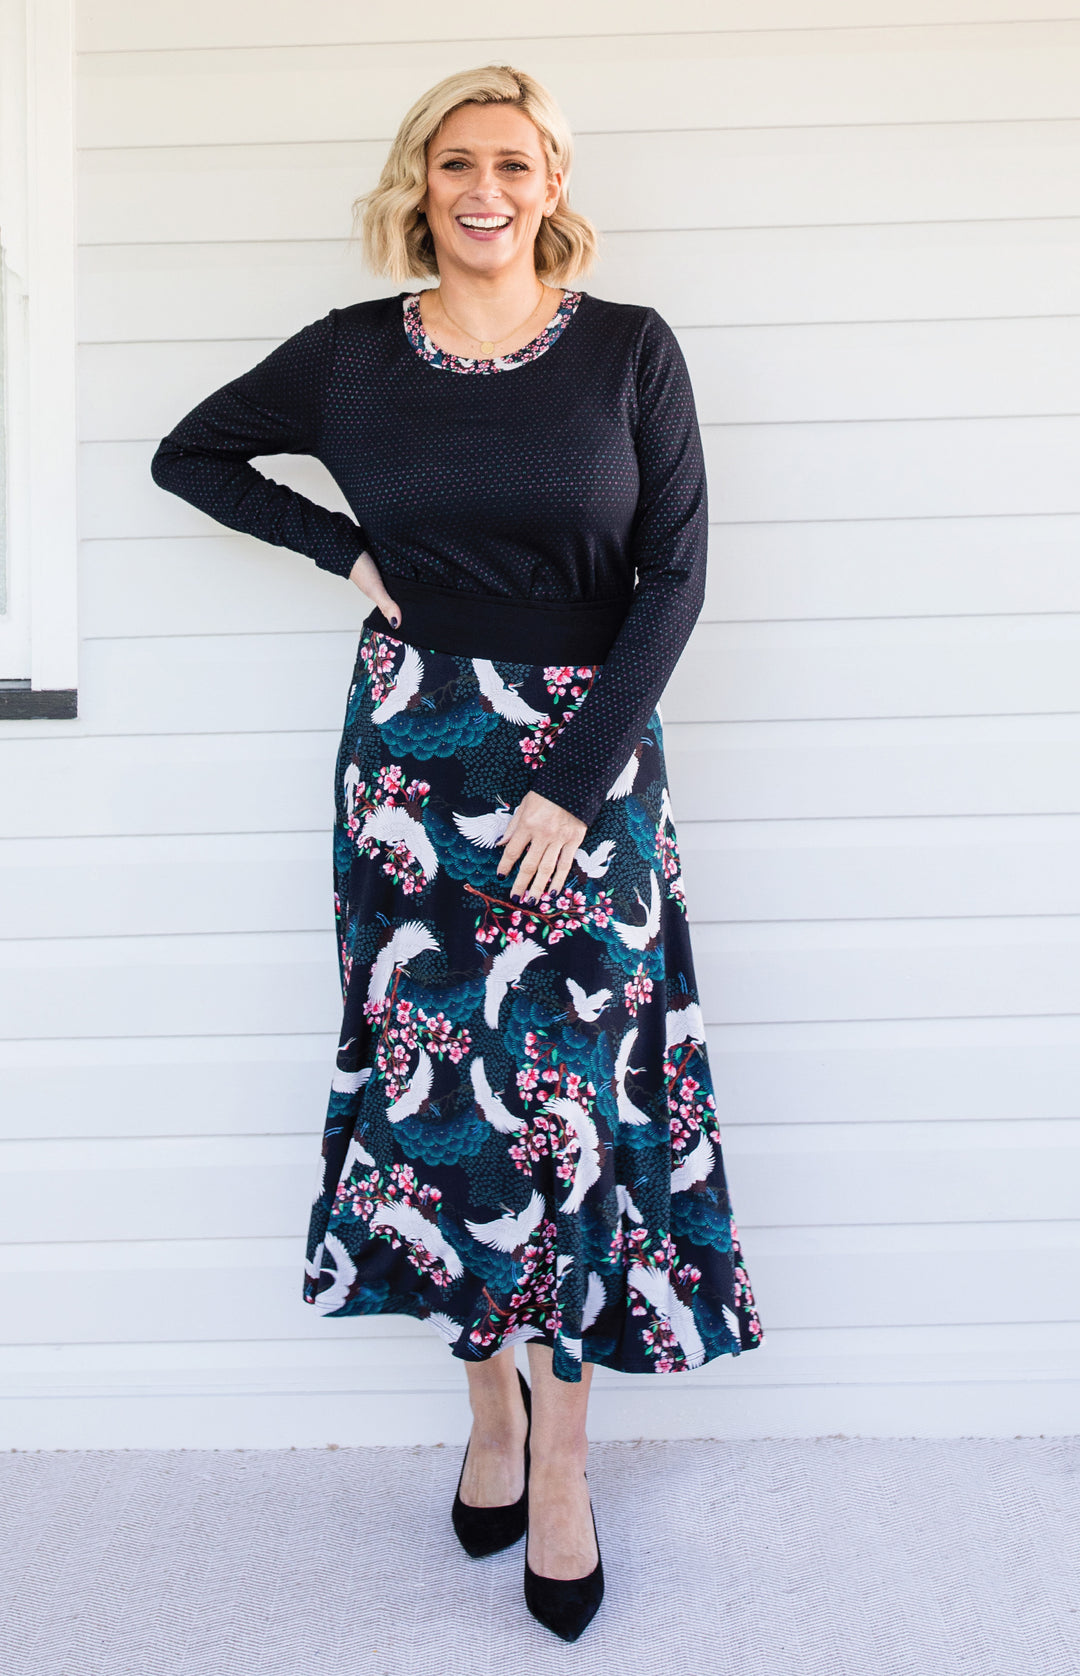 Bamboo Must Have Skirt in birds of a feather black